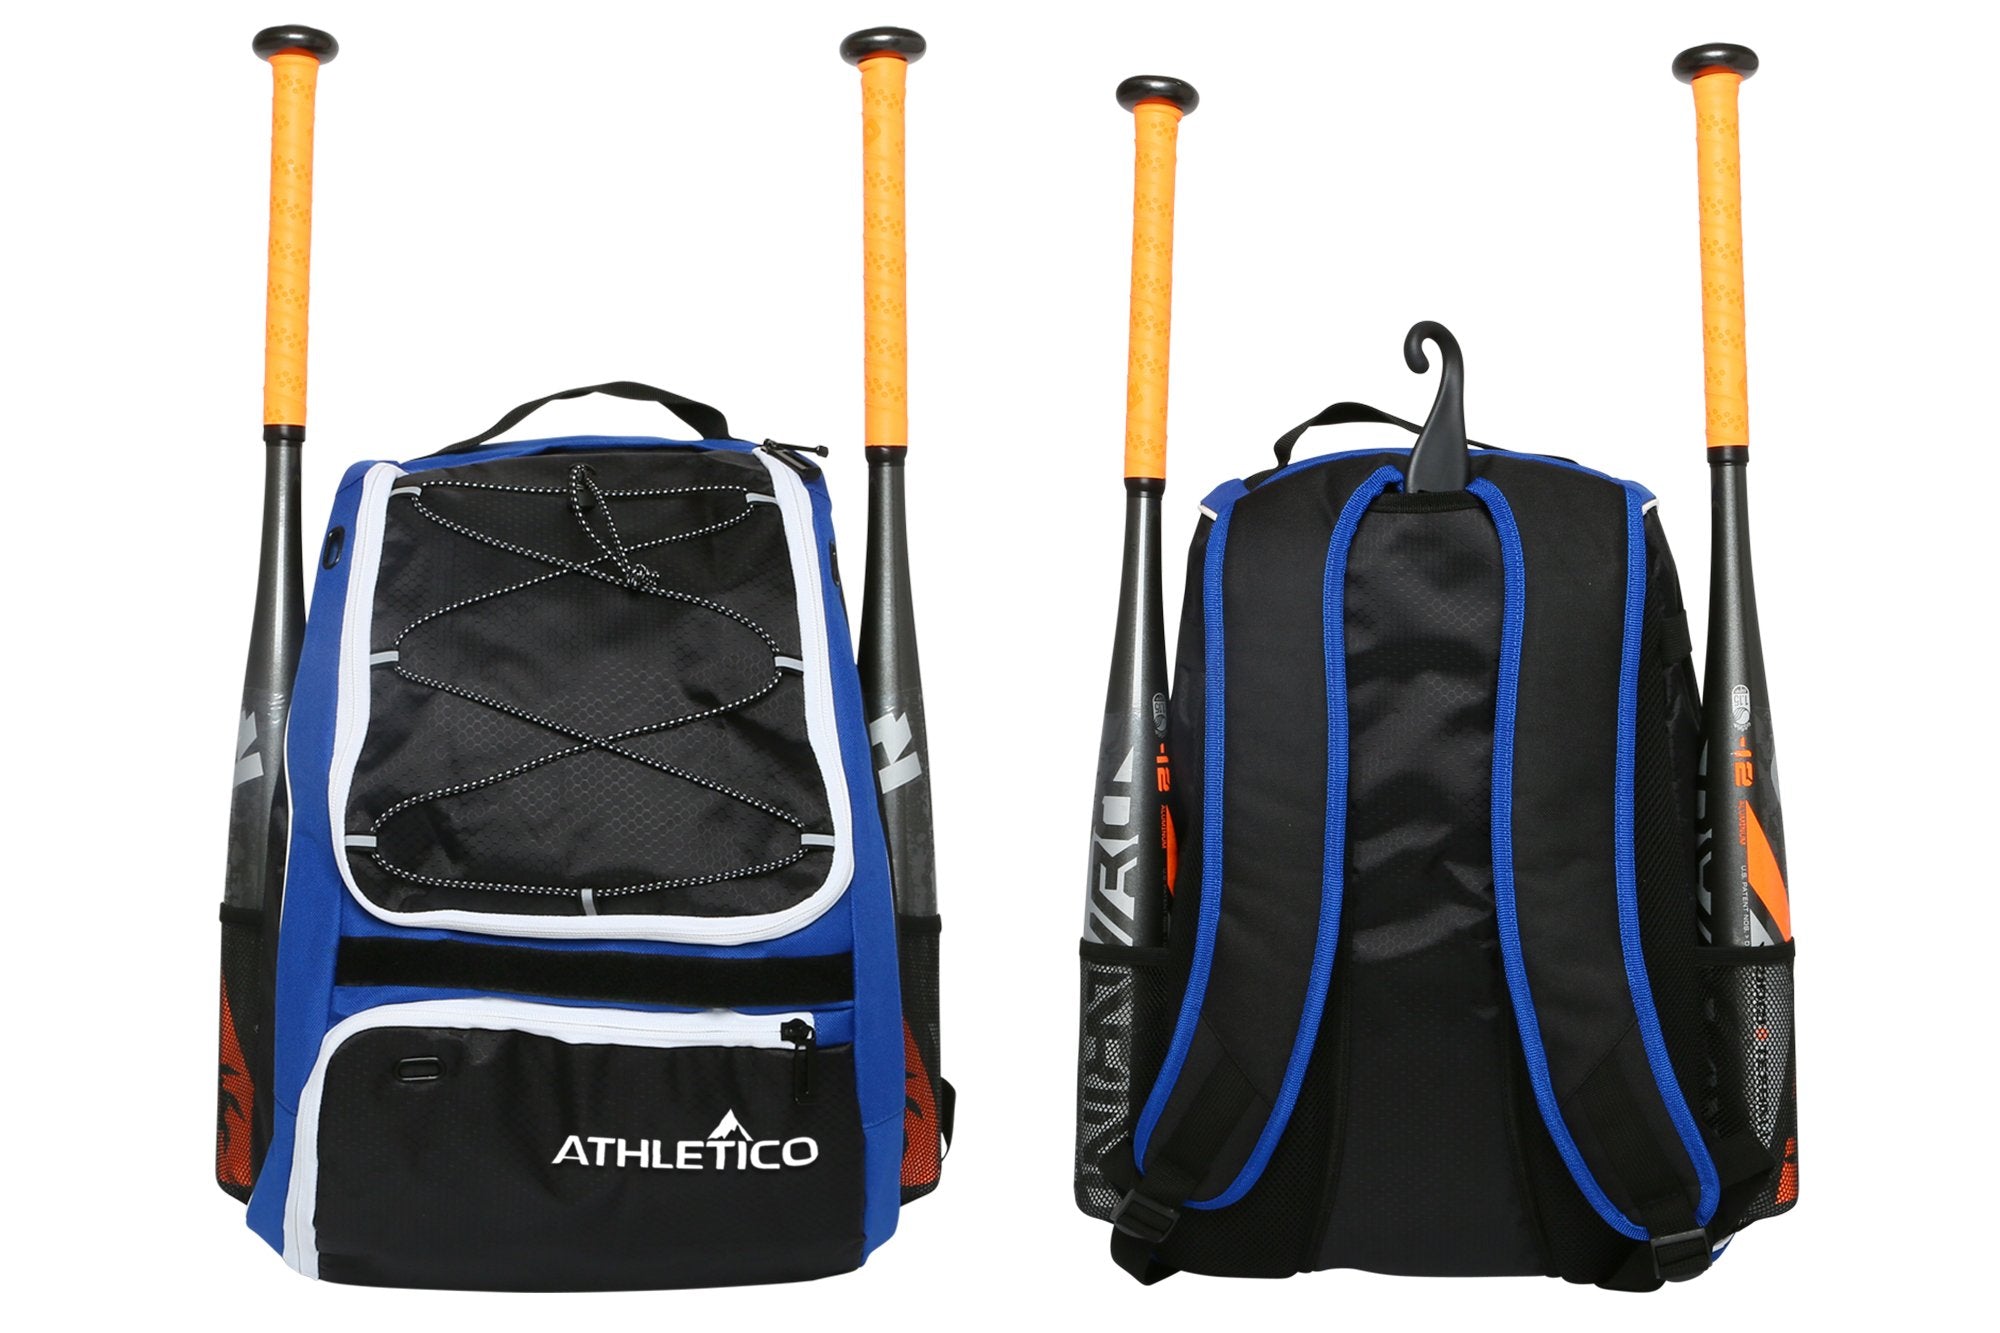 Athletico Baseball Bat Bag - Backpack for Baseball, T-Ball & Softball Equipment & Gear for Youth and Adults | Holds Bat, Helmet, Glove, & Shoes | Separate Shoe Compartment & Fence Hook (Blue)  - Good